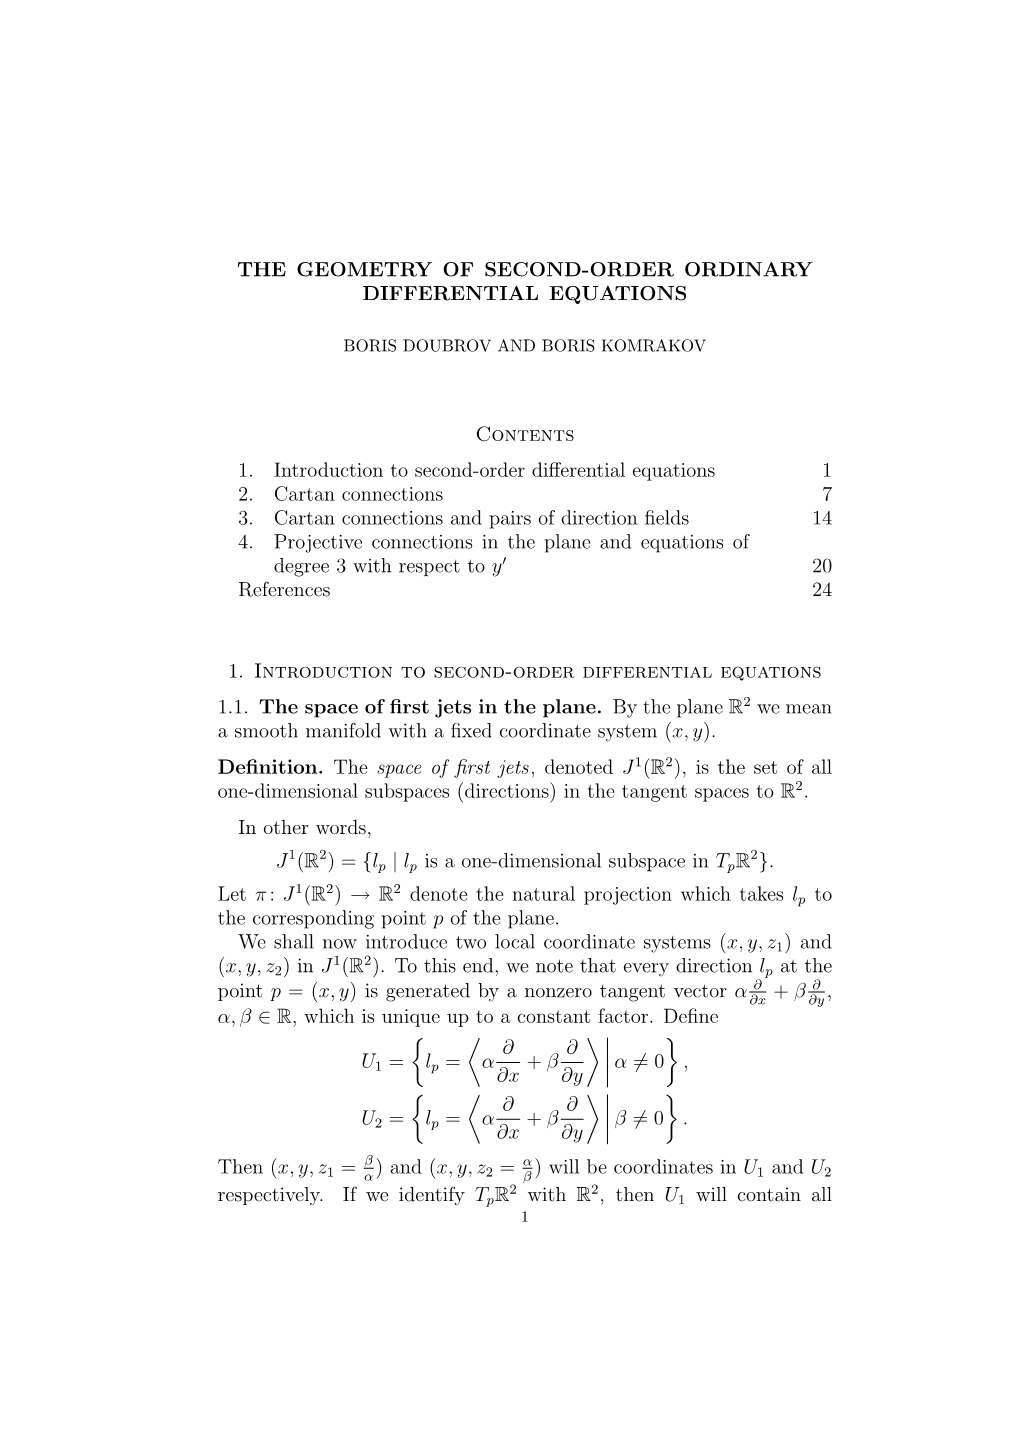 The Geometry of Second-Order Ordinary Differential Equations